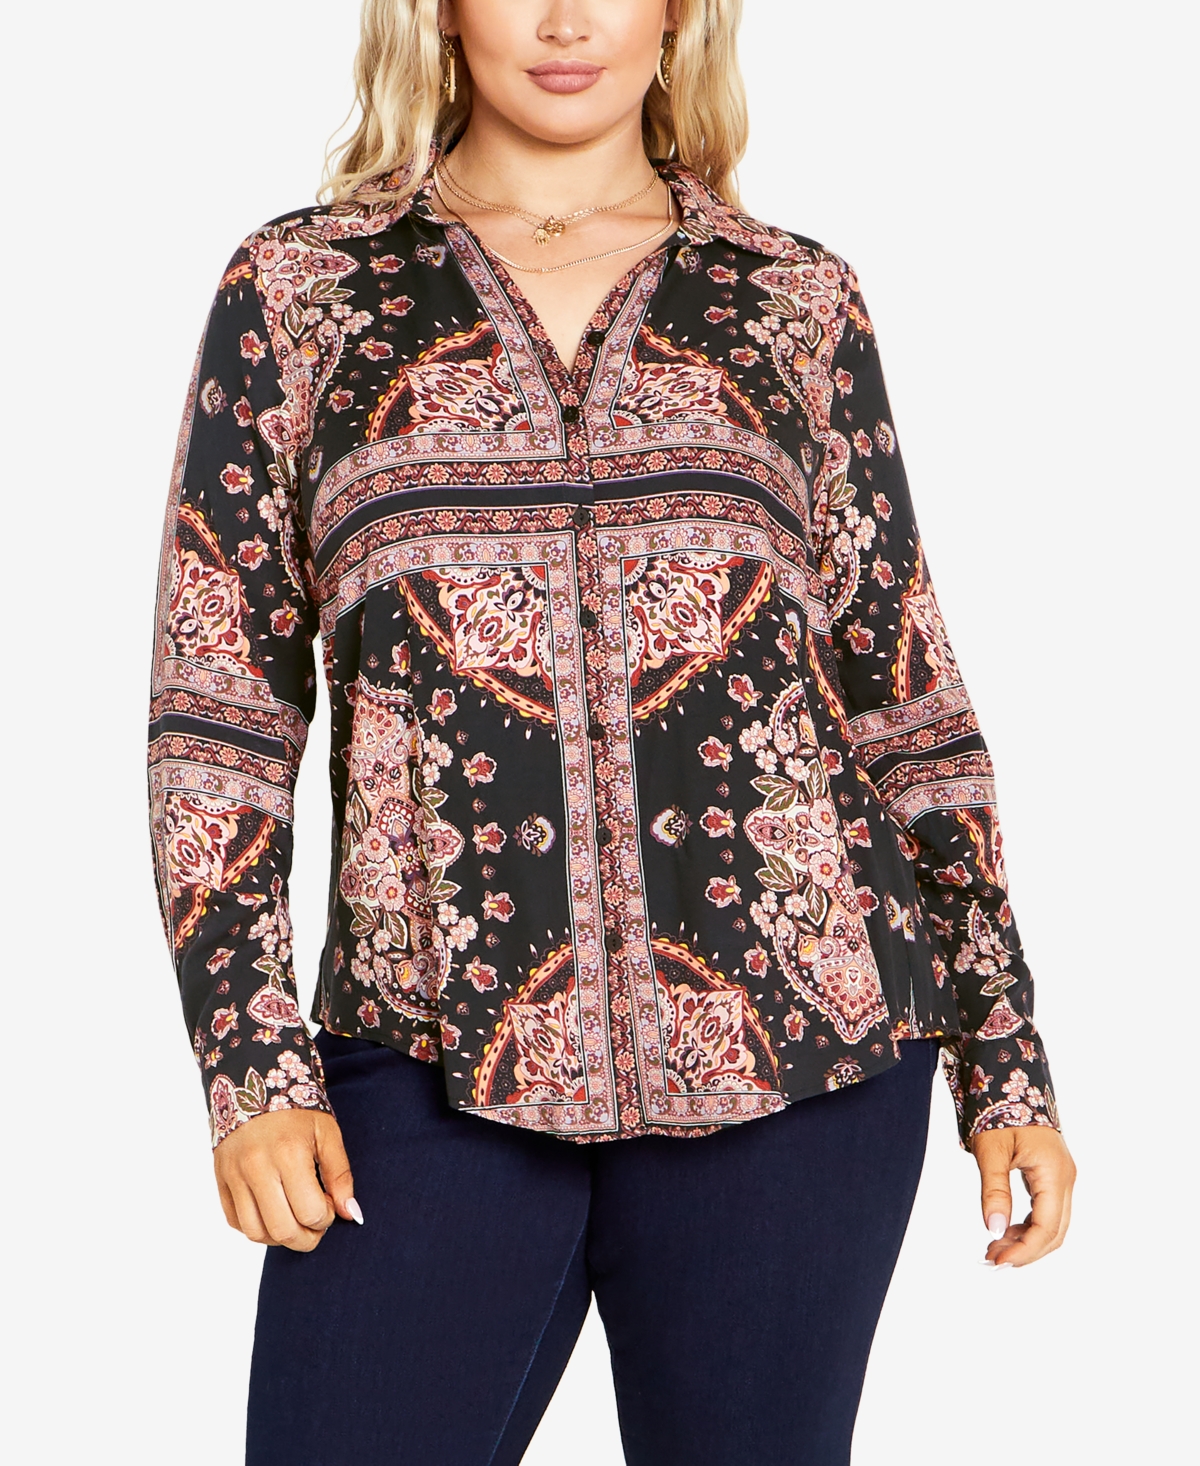 Avenue Plus Size Kendall Placement V-neck Sleeve Shirt Top In Fall For Me